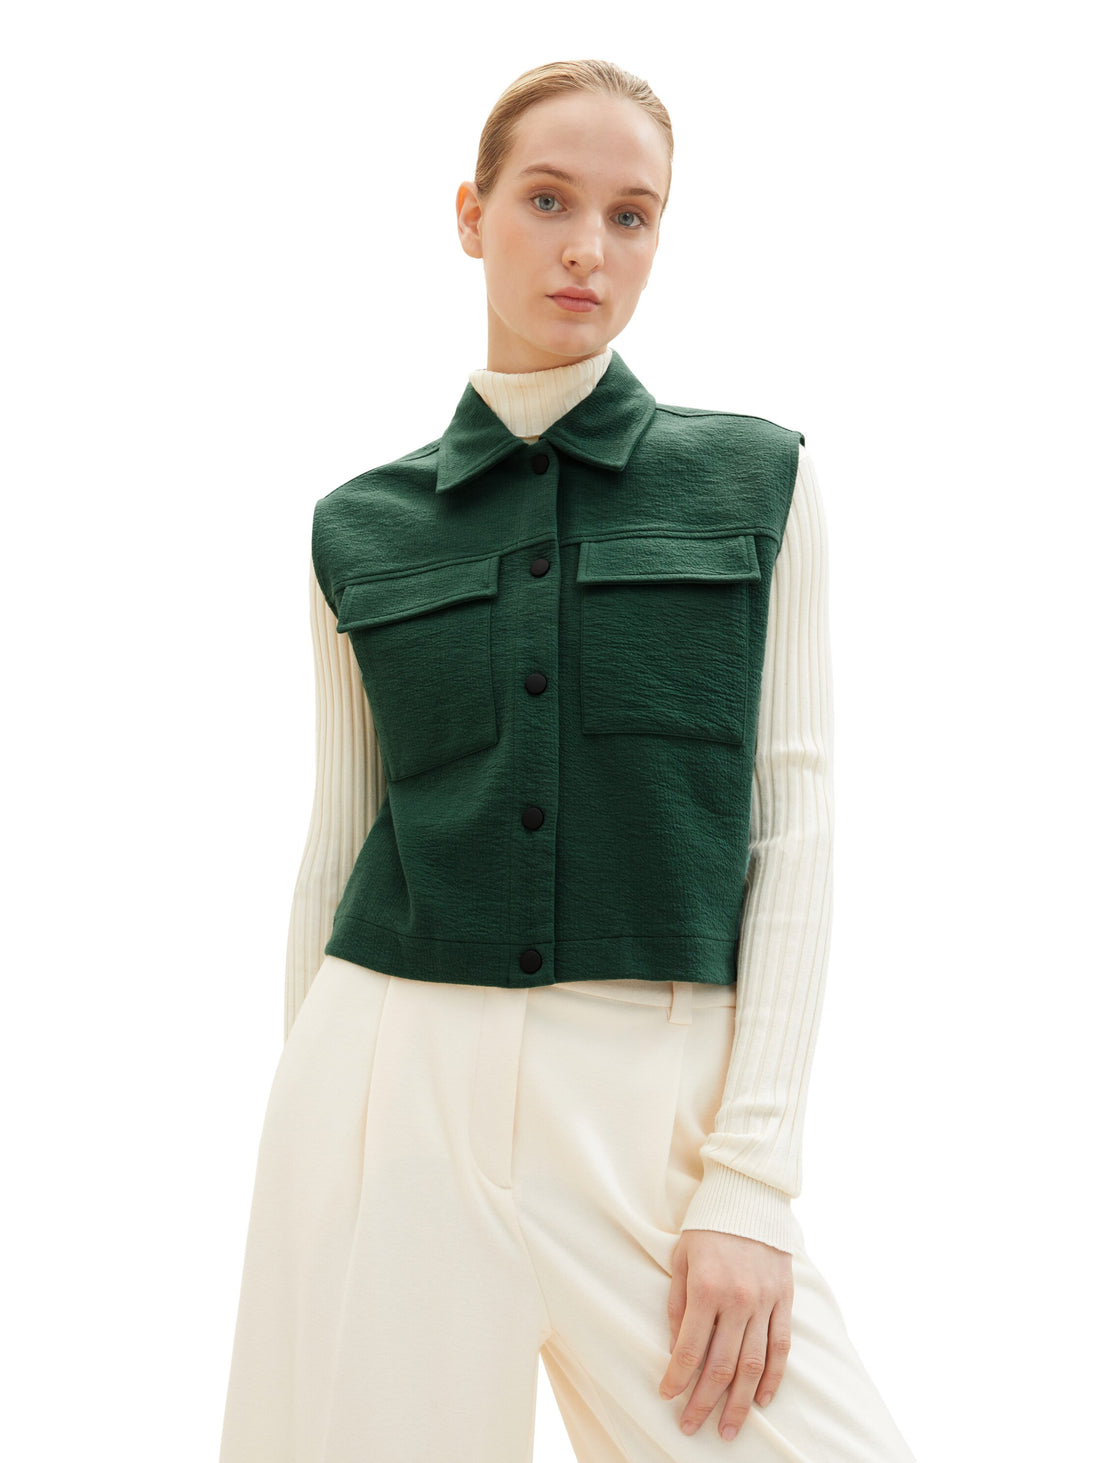 Green Collared Vest With Pockets